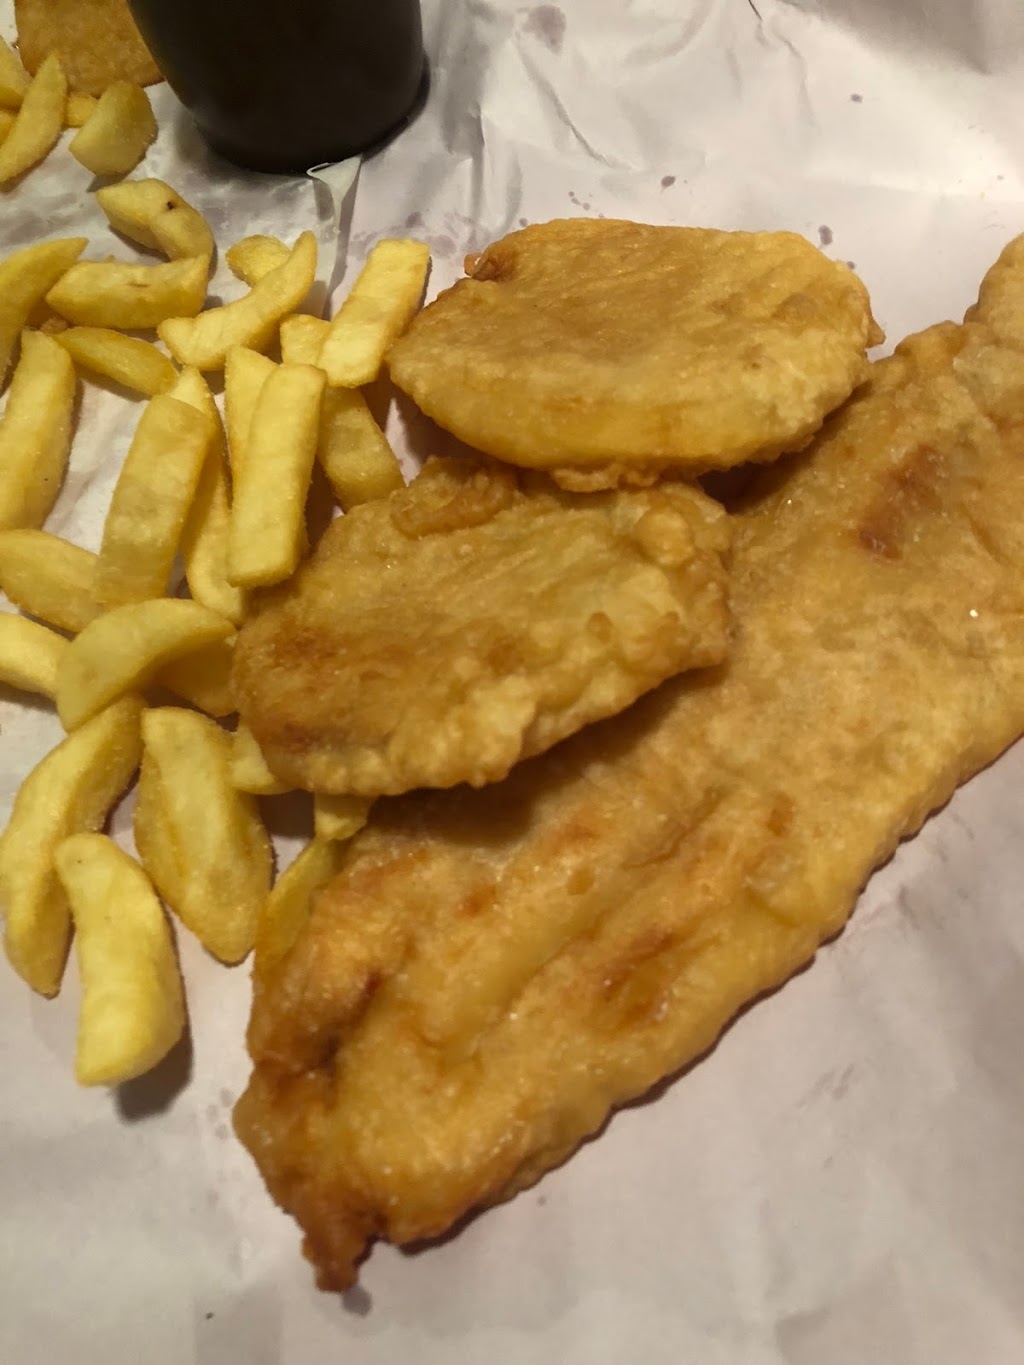 Hook to Plate Fish and Chips | restaurant | 10-12 Station St, Riddells Creek VIC 3431, Australia | 0354286200 OR +61 3 5428 6200